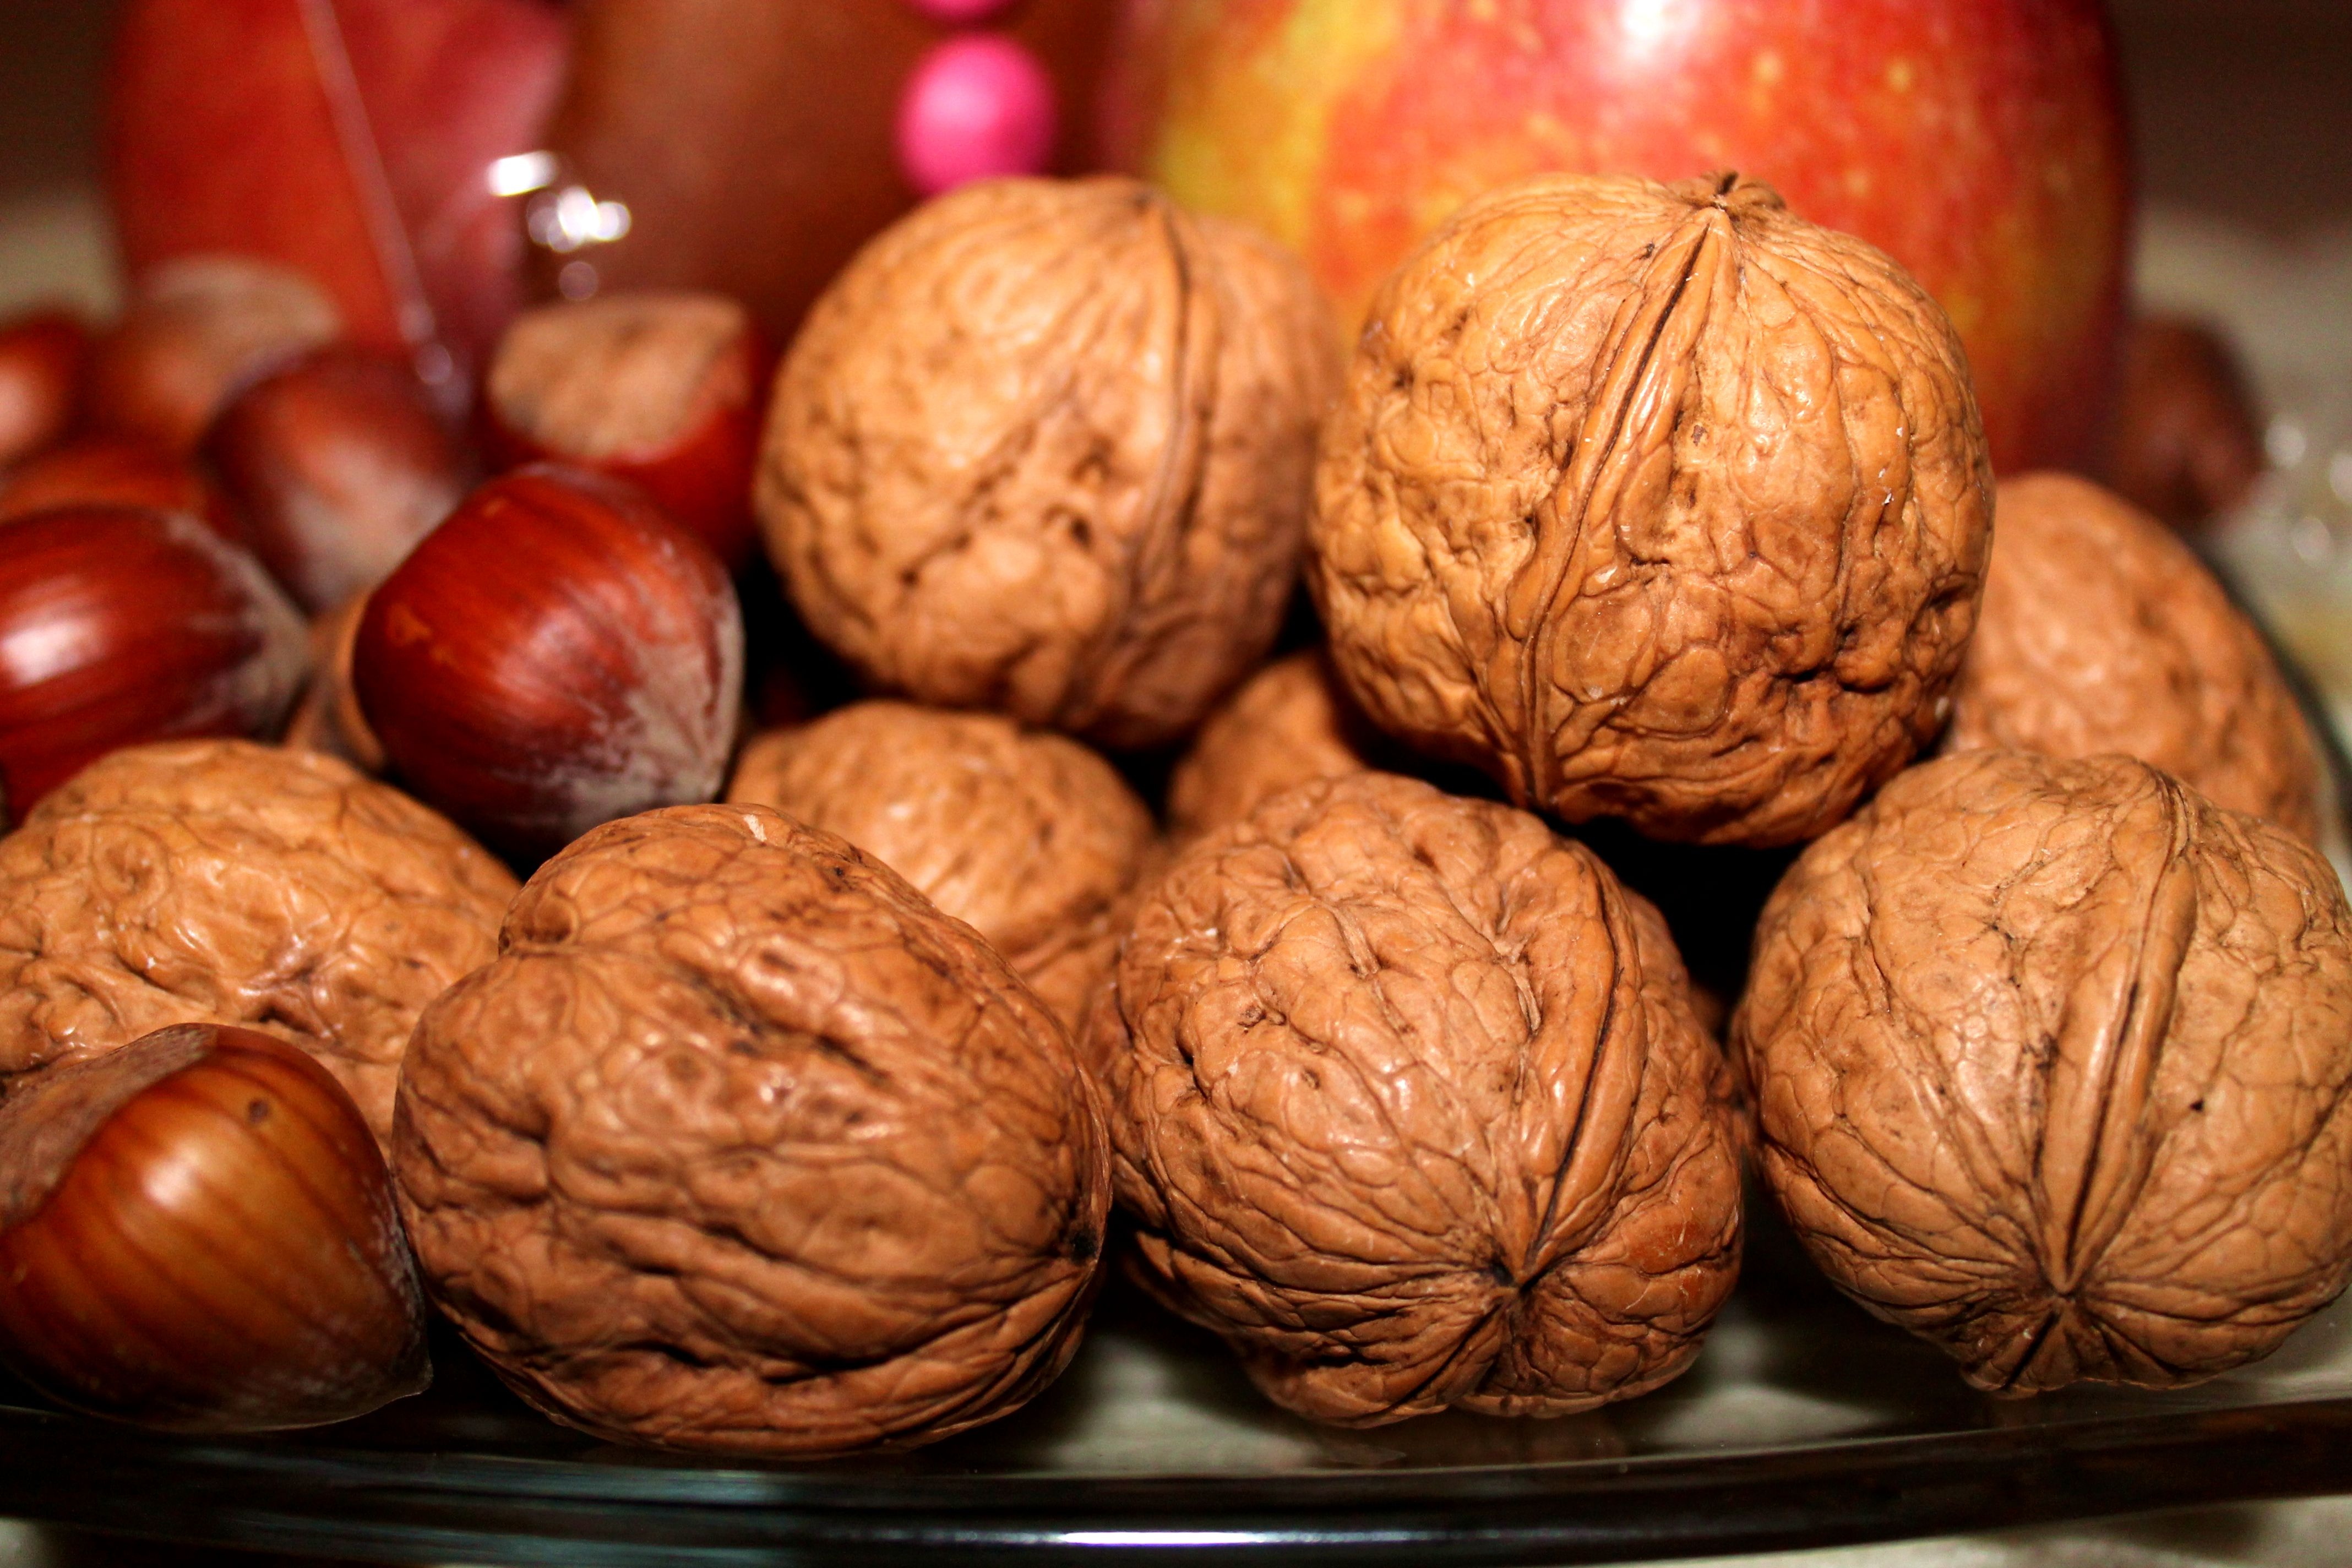 143153 download wallpaper food, apples, walnuts, hazelnut screensavers and pictures for free